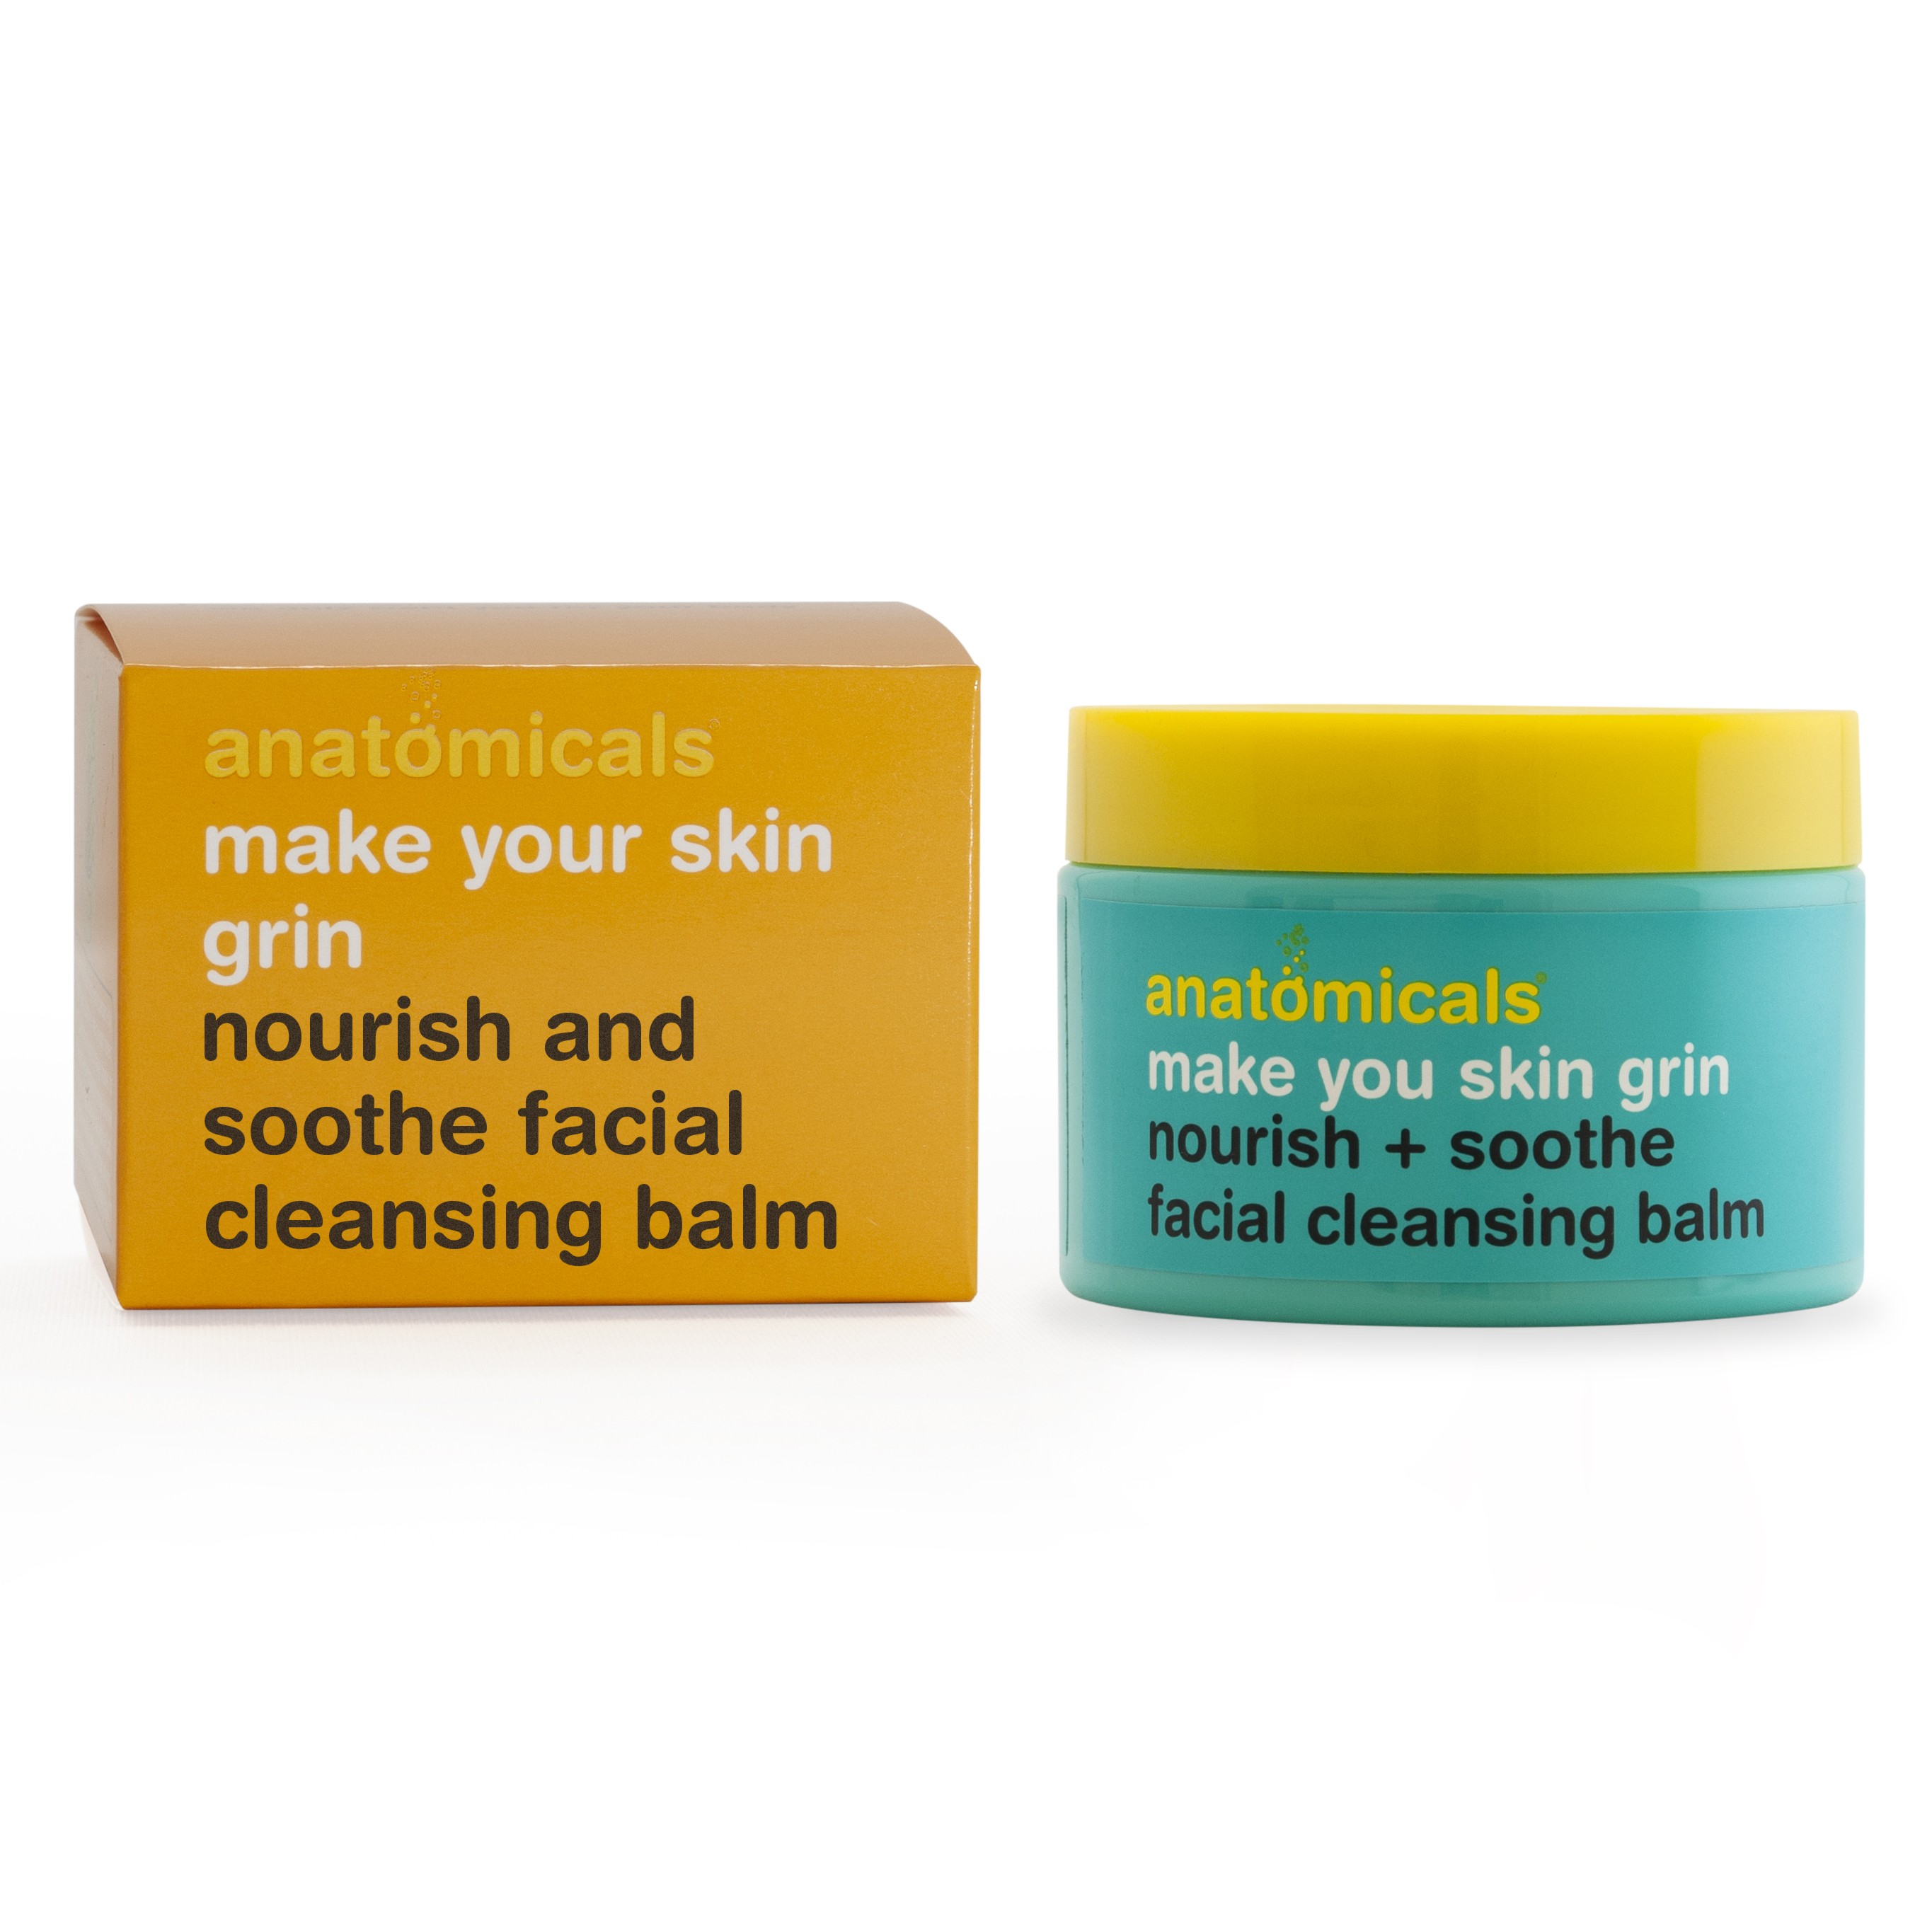 Make Your Skin Grin - Nourish & Soothe Facial Cleansing Balm